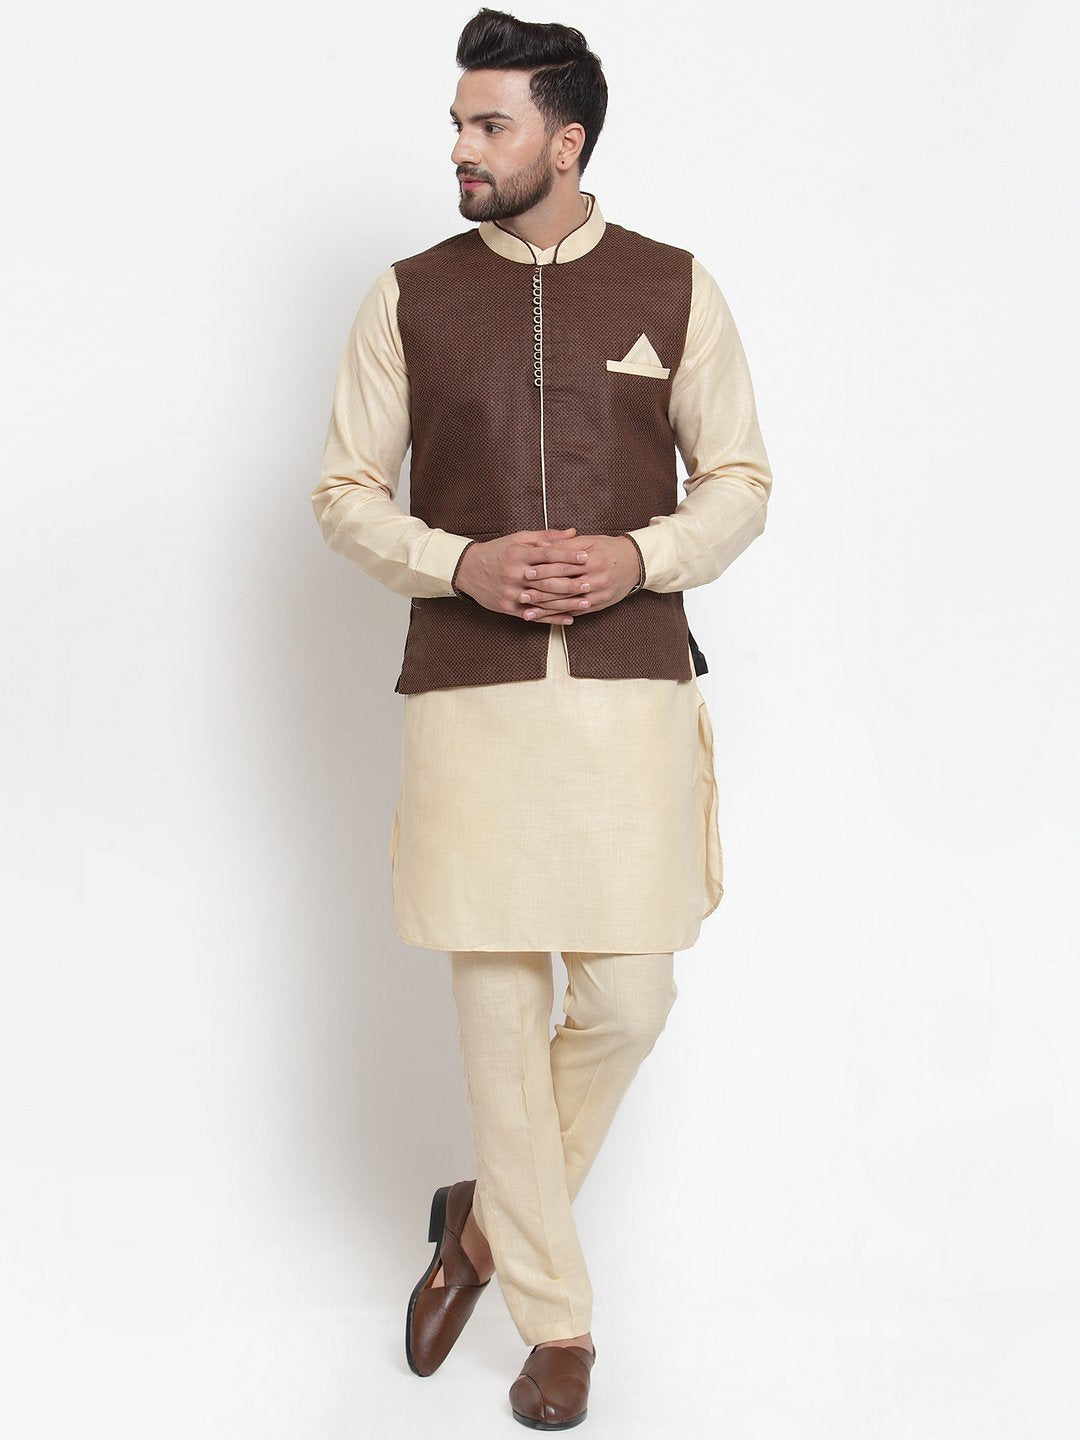 Top 7 Difference Styles of Nehru Jacket Outfit For Men | by nehrujacket |  Medium